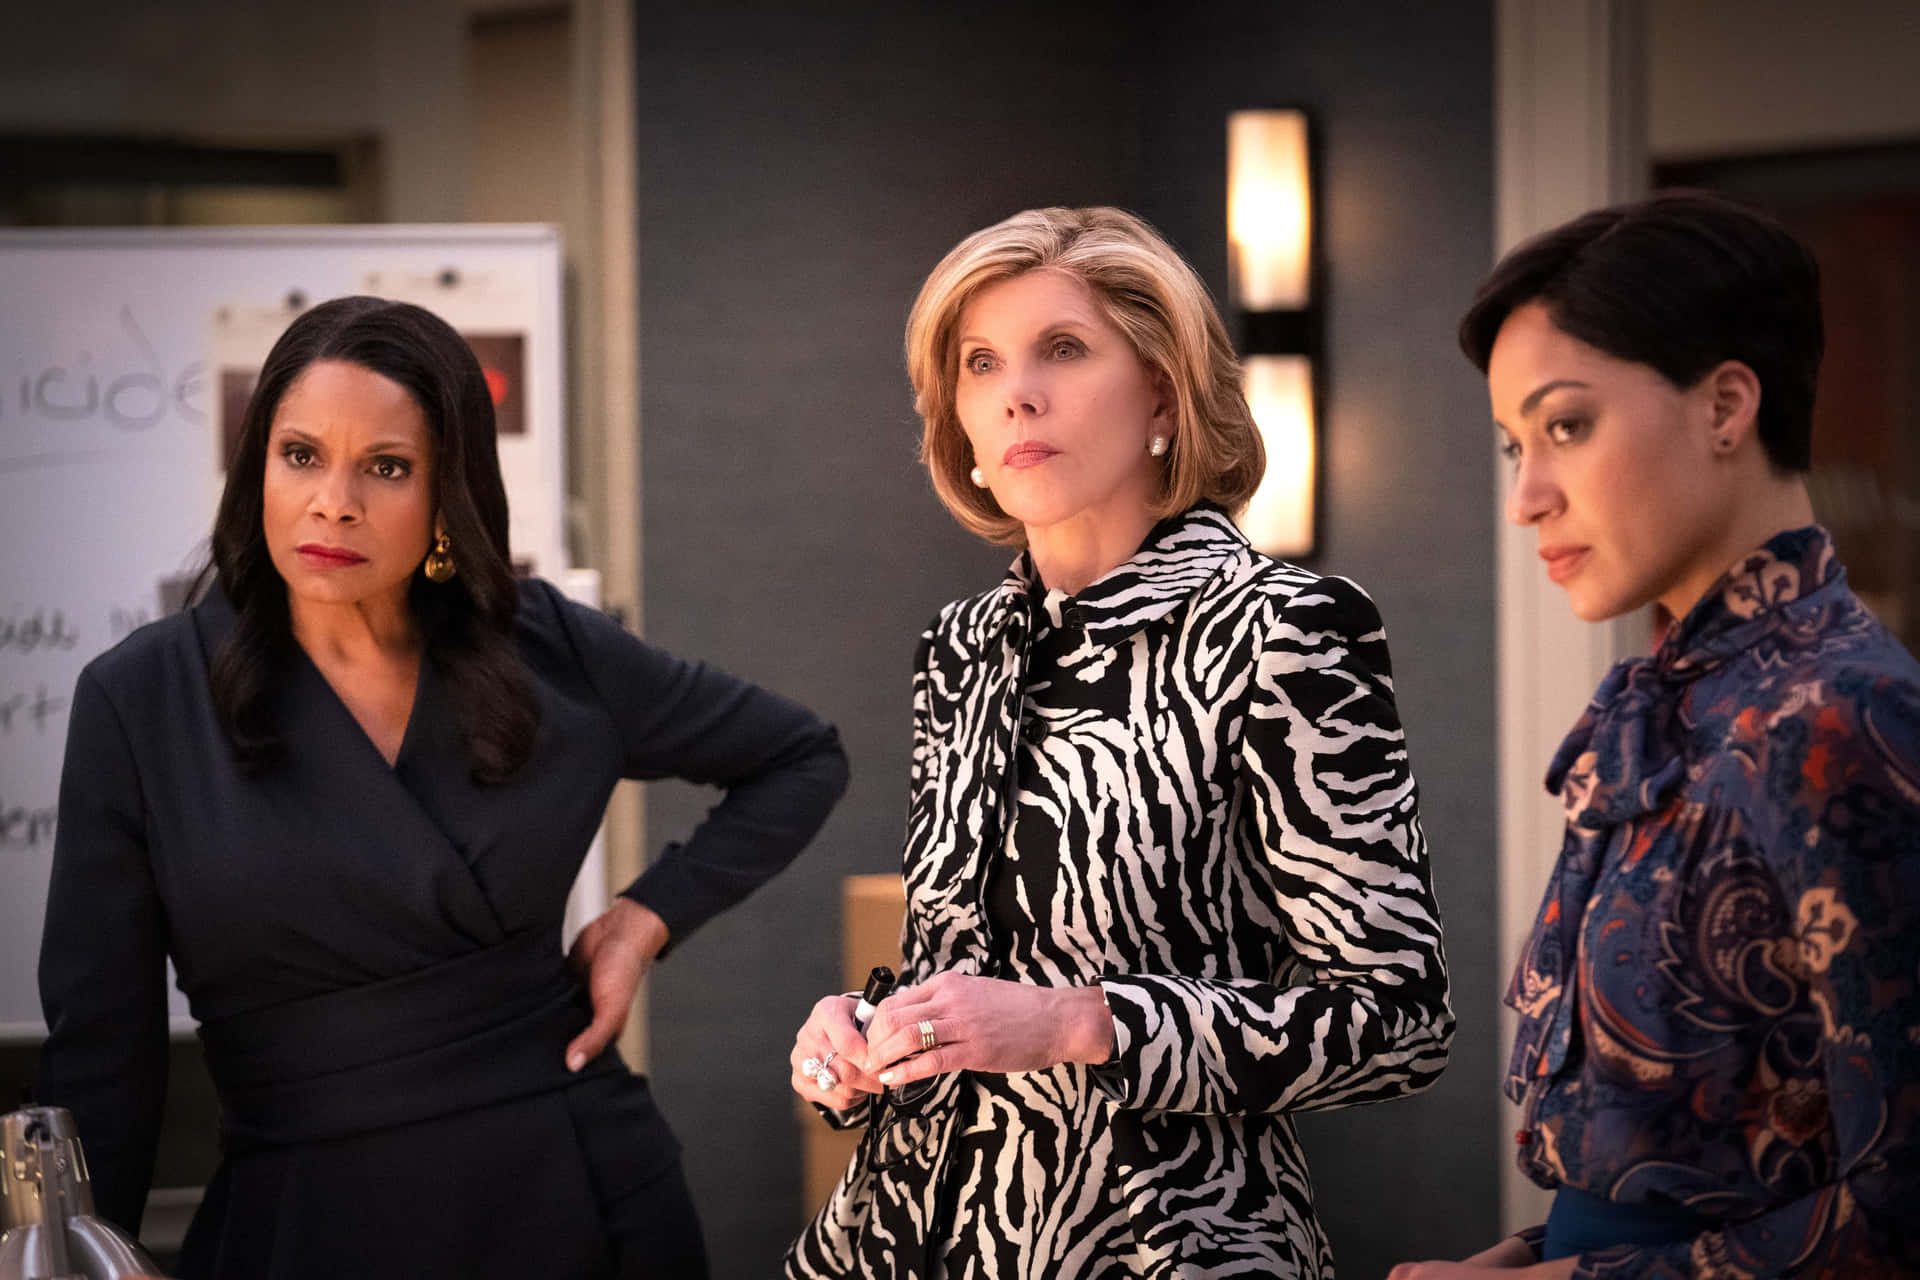 The Good Fight Intense Discussion Wallpaper